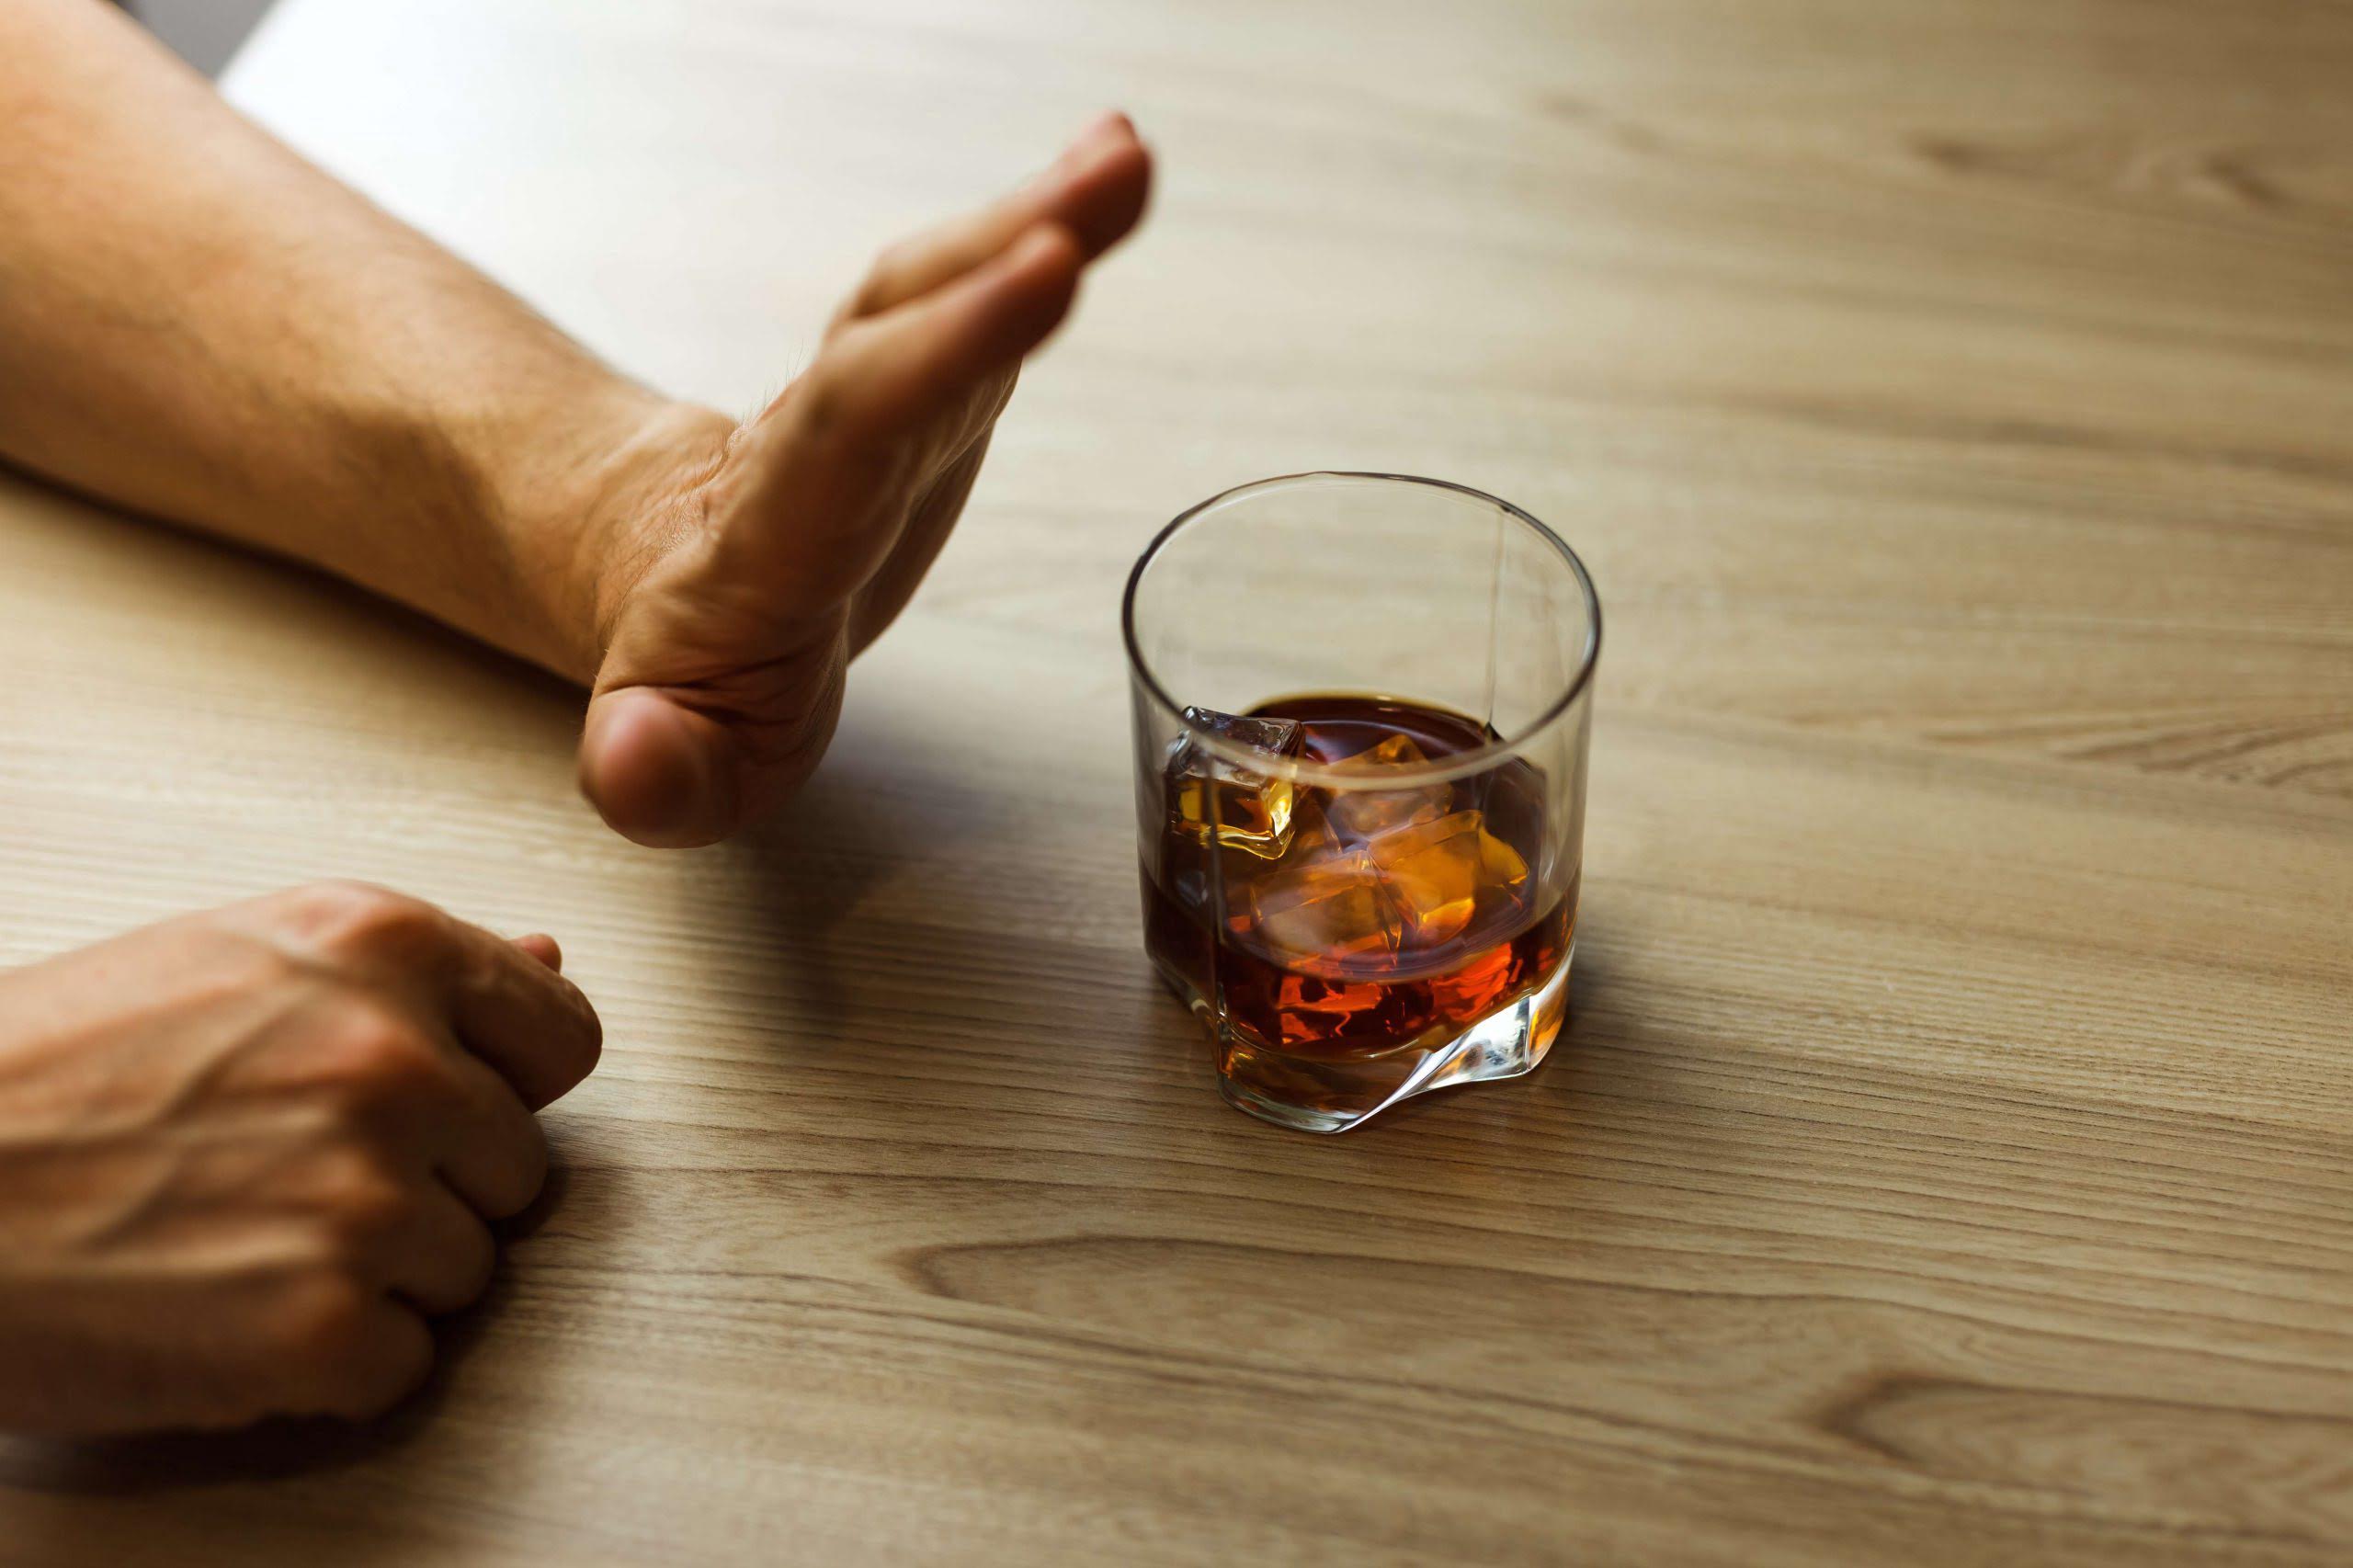 what causes alcoholism